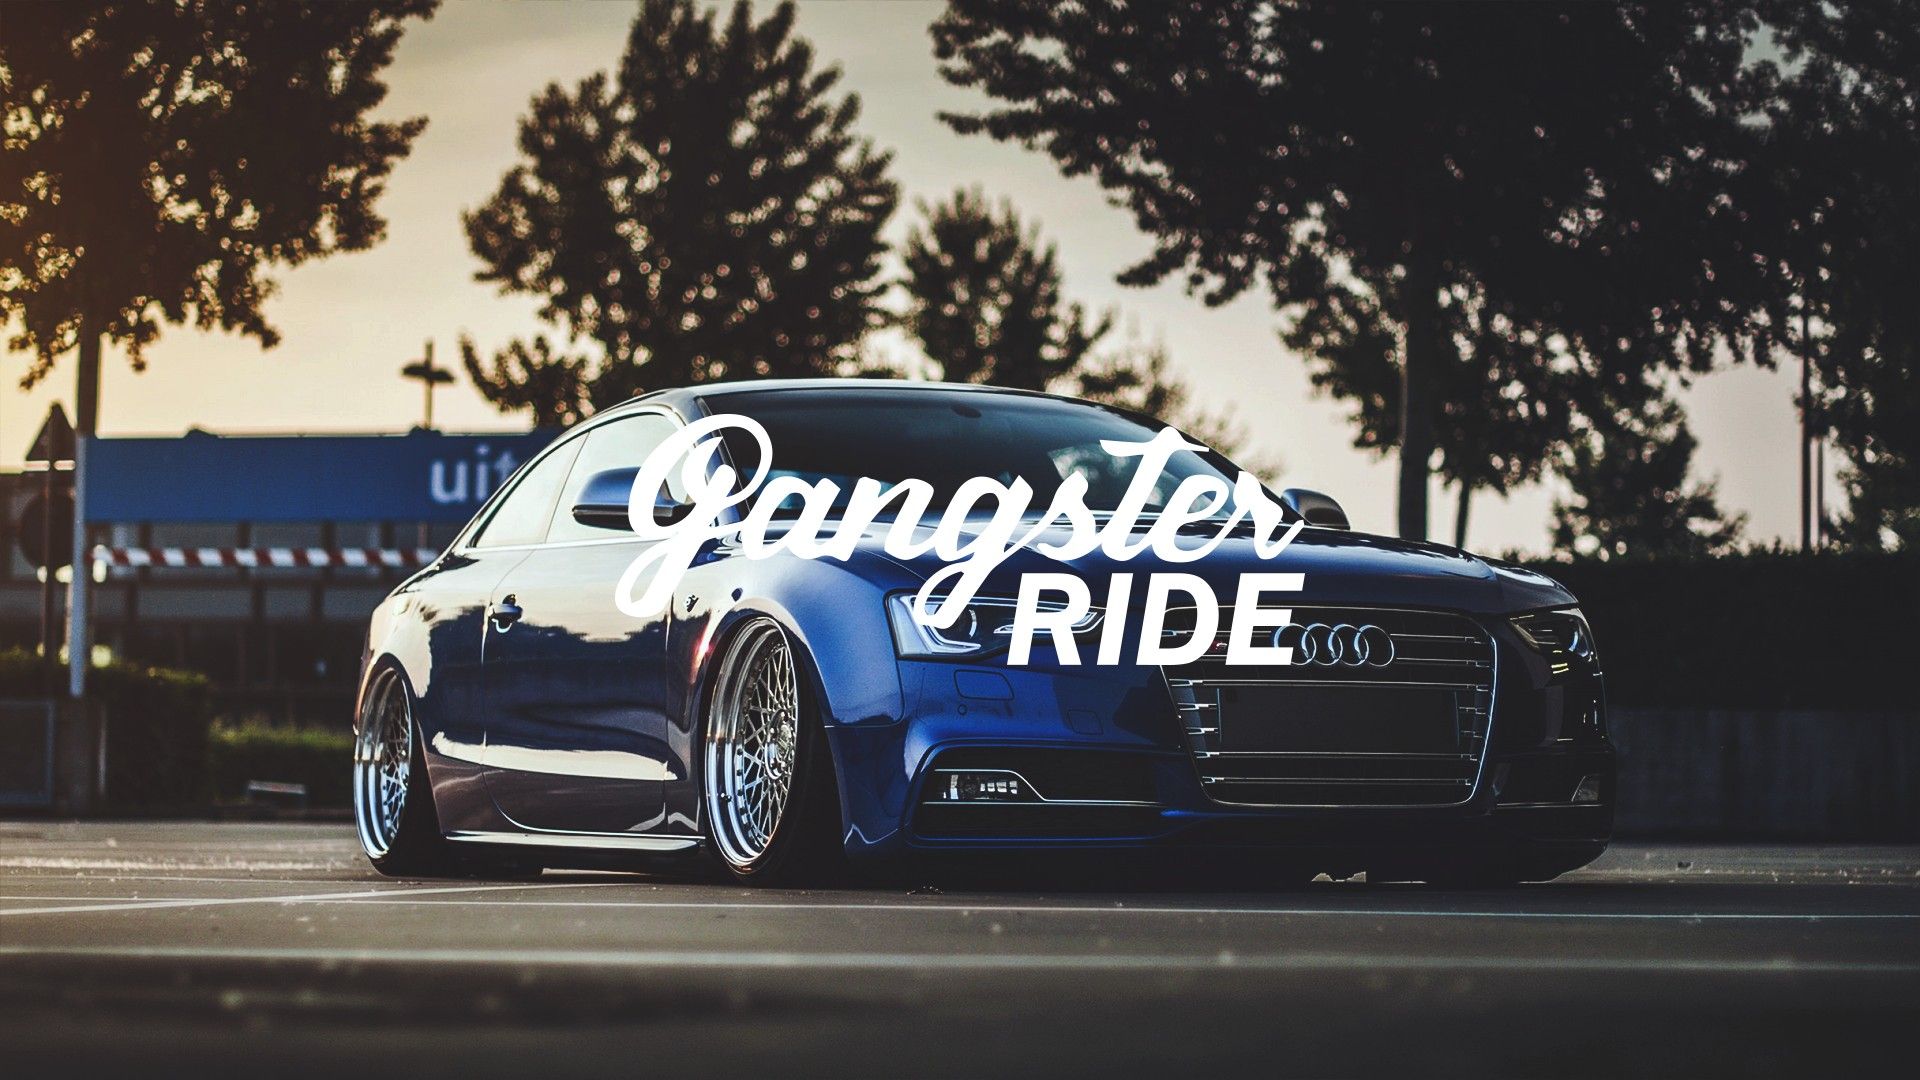 GANGSTER RIDE, Car, Tuning, Lowrider, Audi, Colorful, Stanced